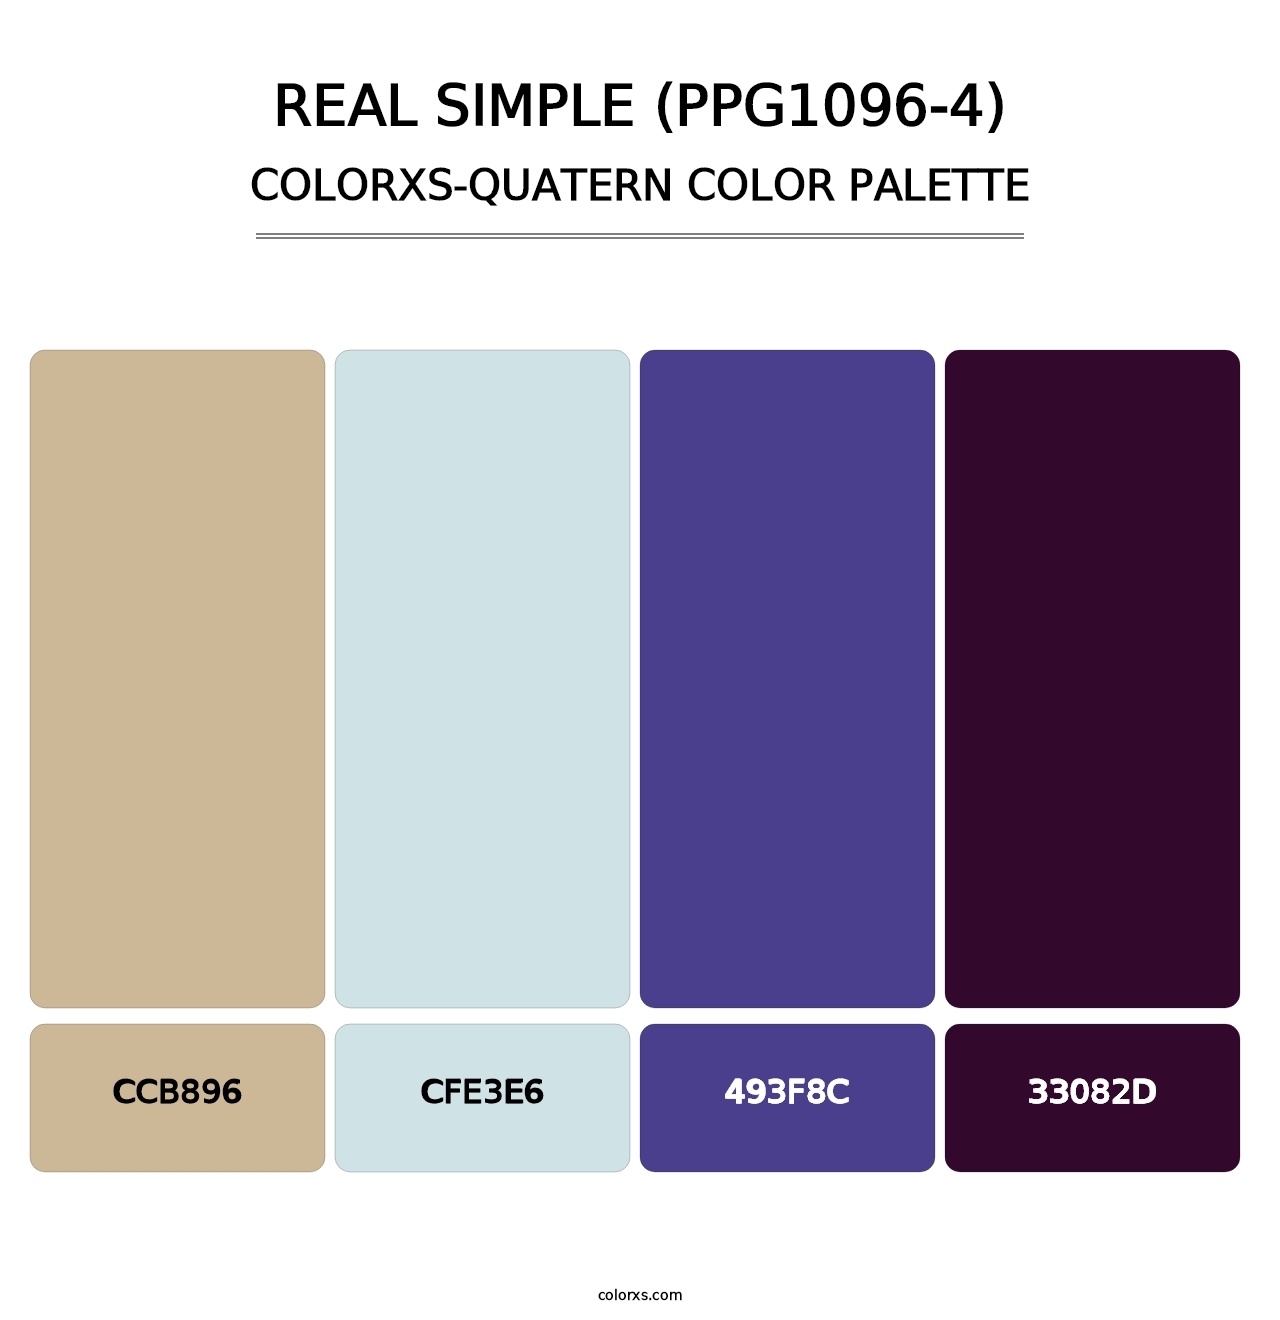 Real Simple (PPG1096-4) - Colorxs Quatern Palette